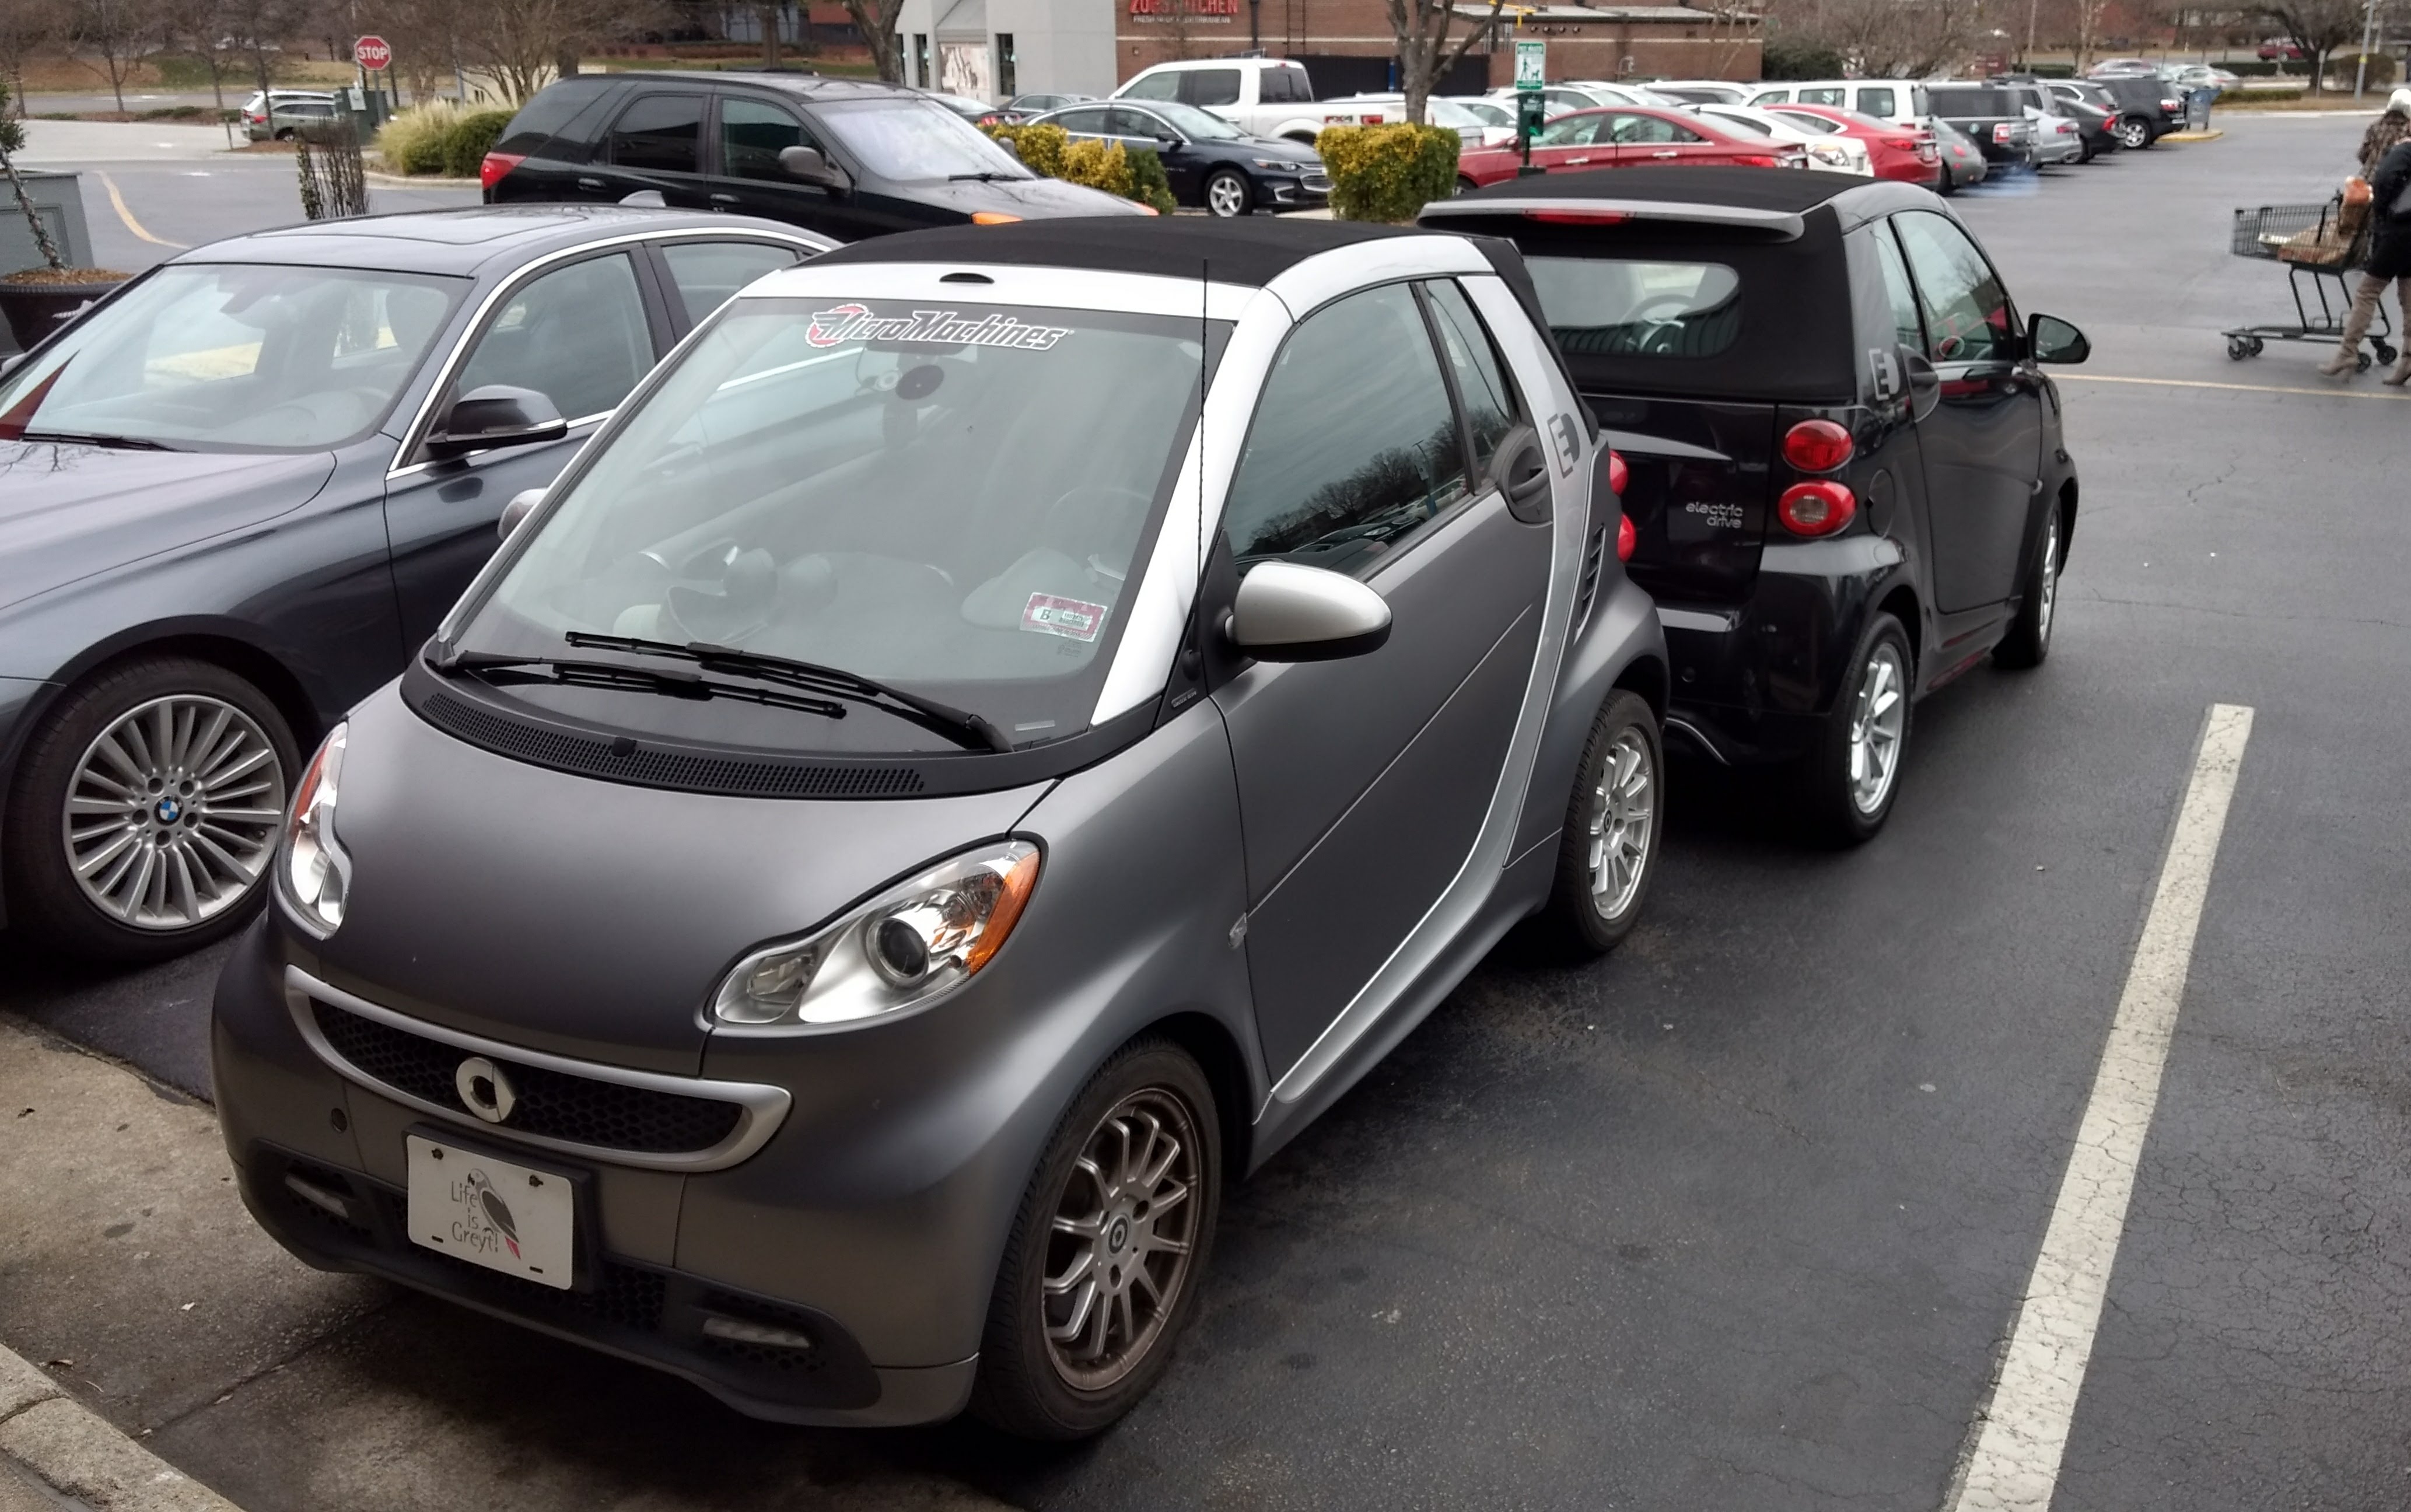 Smart cars are easy to park